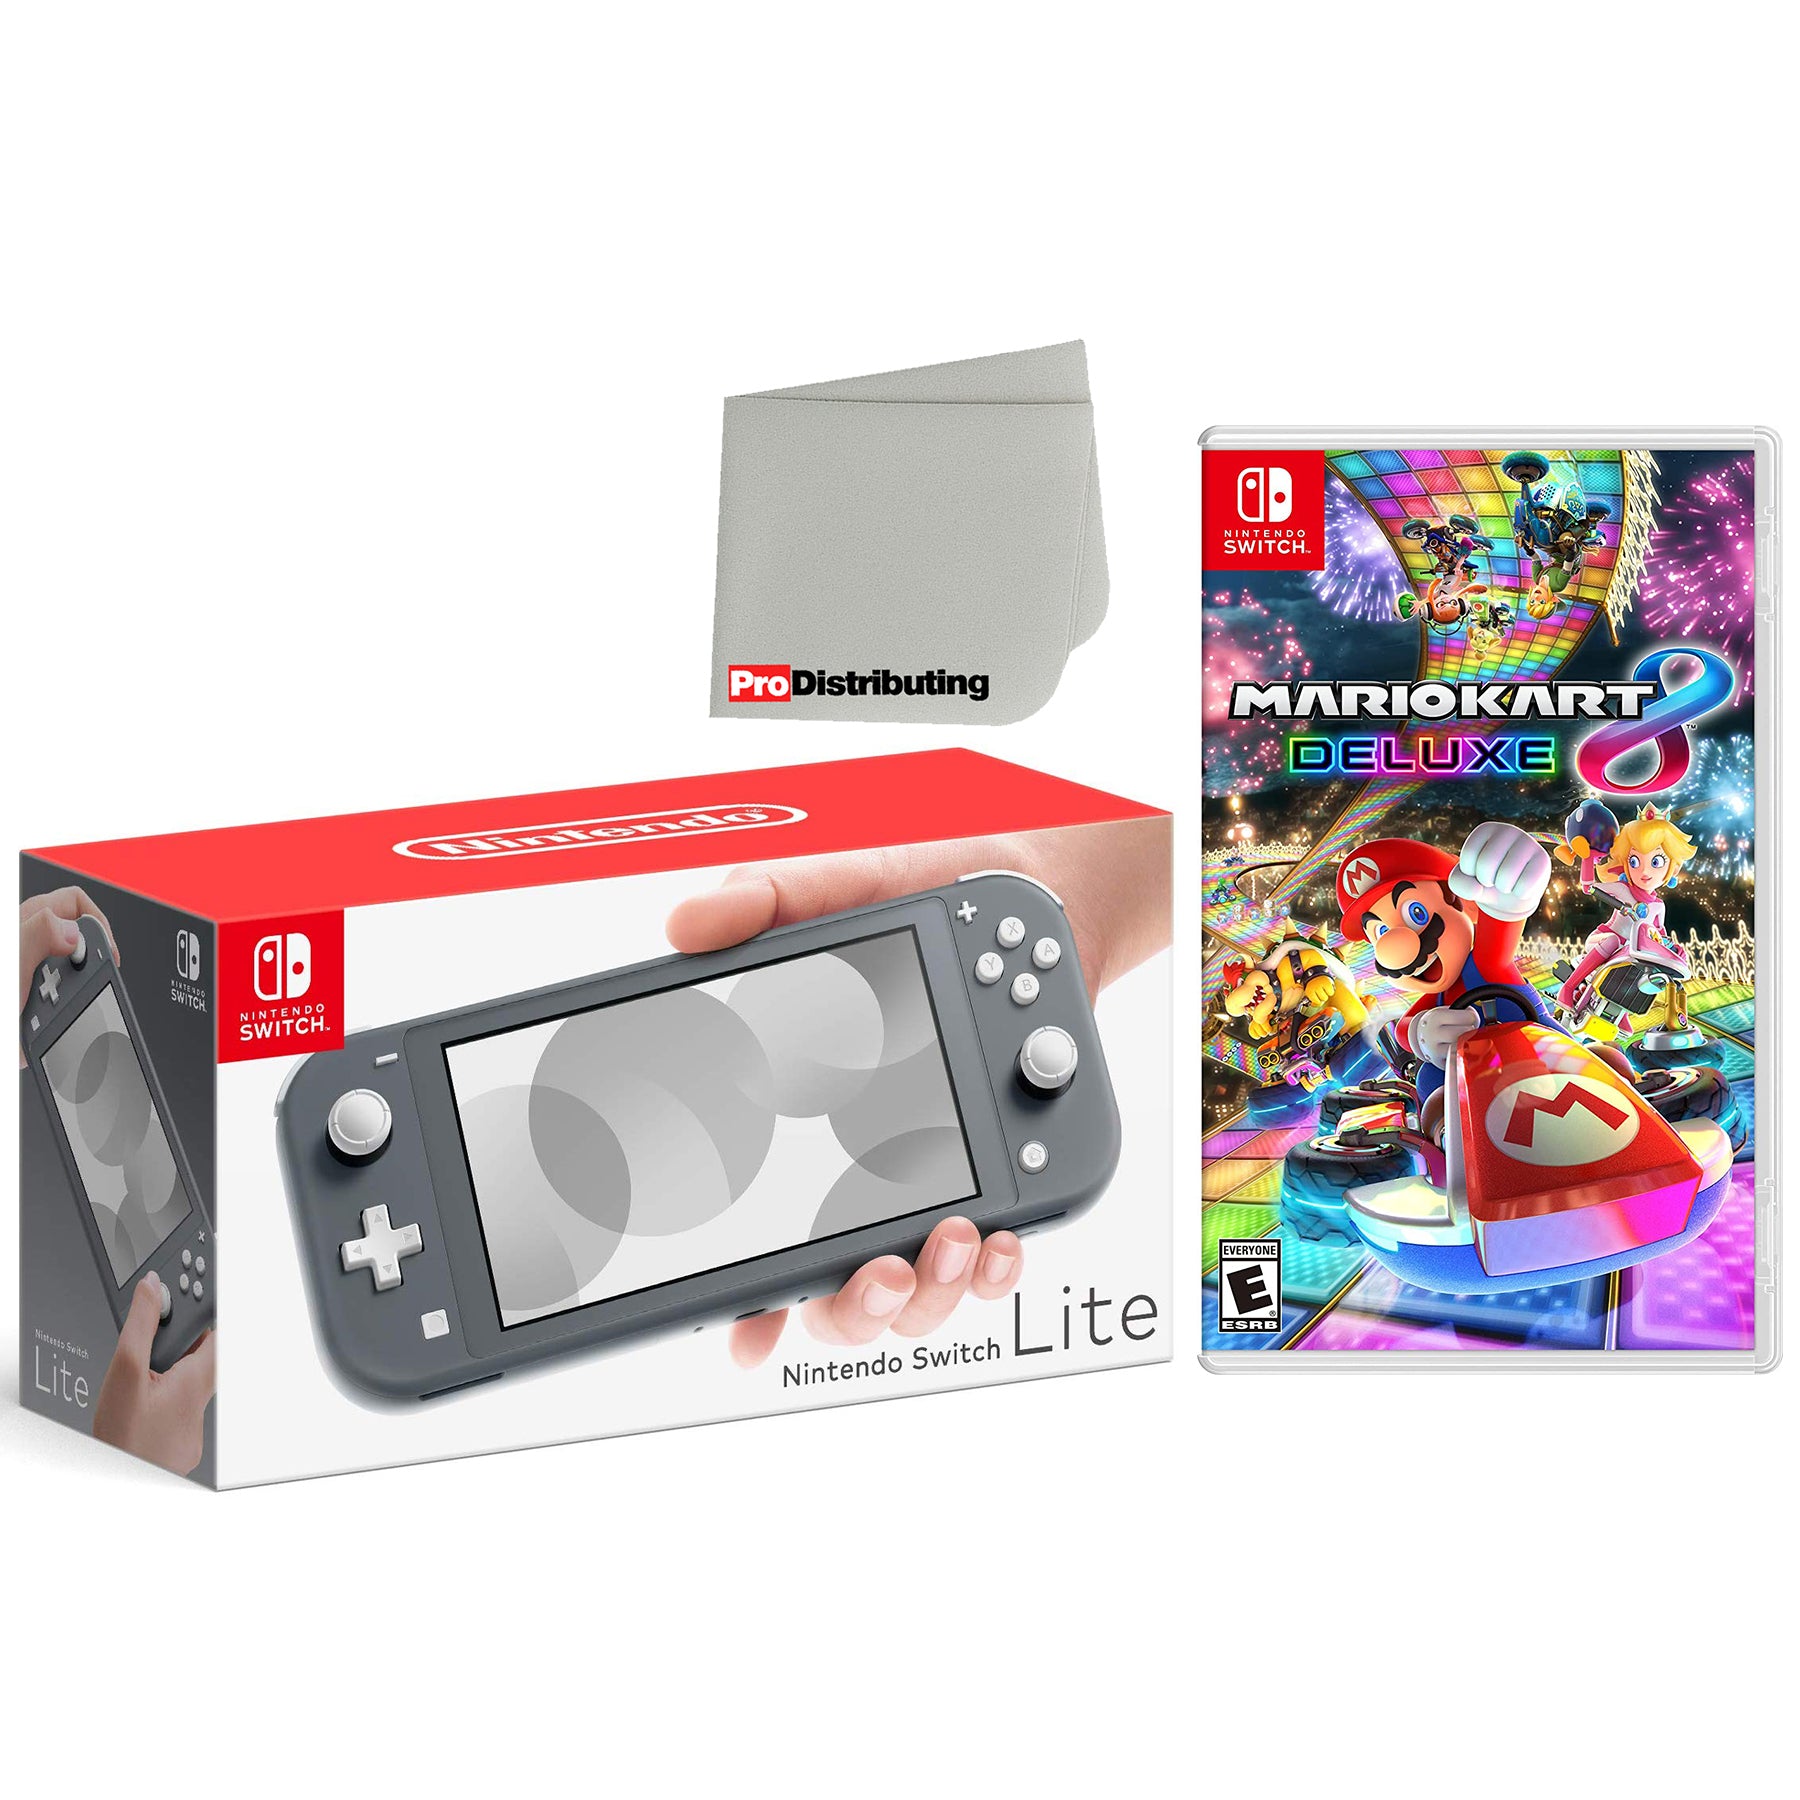 Nintendo Switch Lite 32GB Handheld Video Game Console in Gray with Mario  Kart 8 Deluxe Game Bundle freeshipping - Pro-Distributing